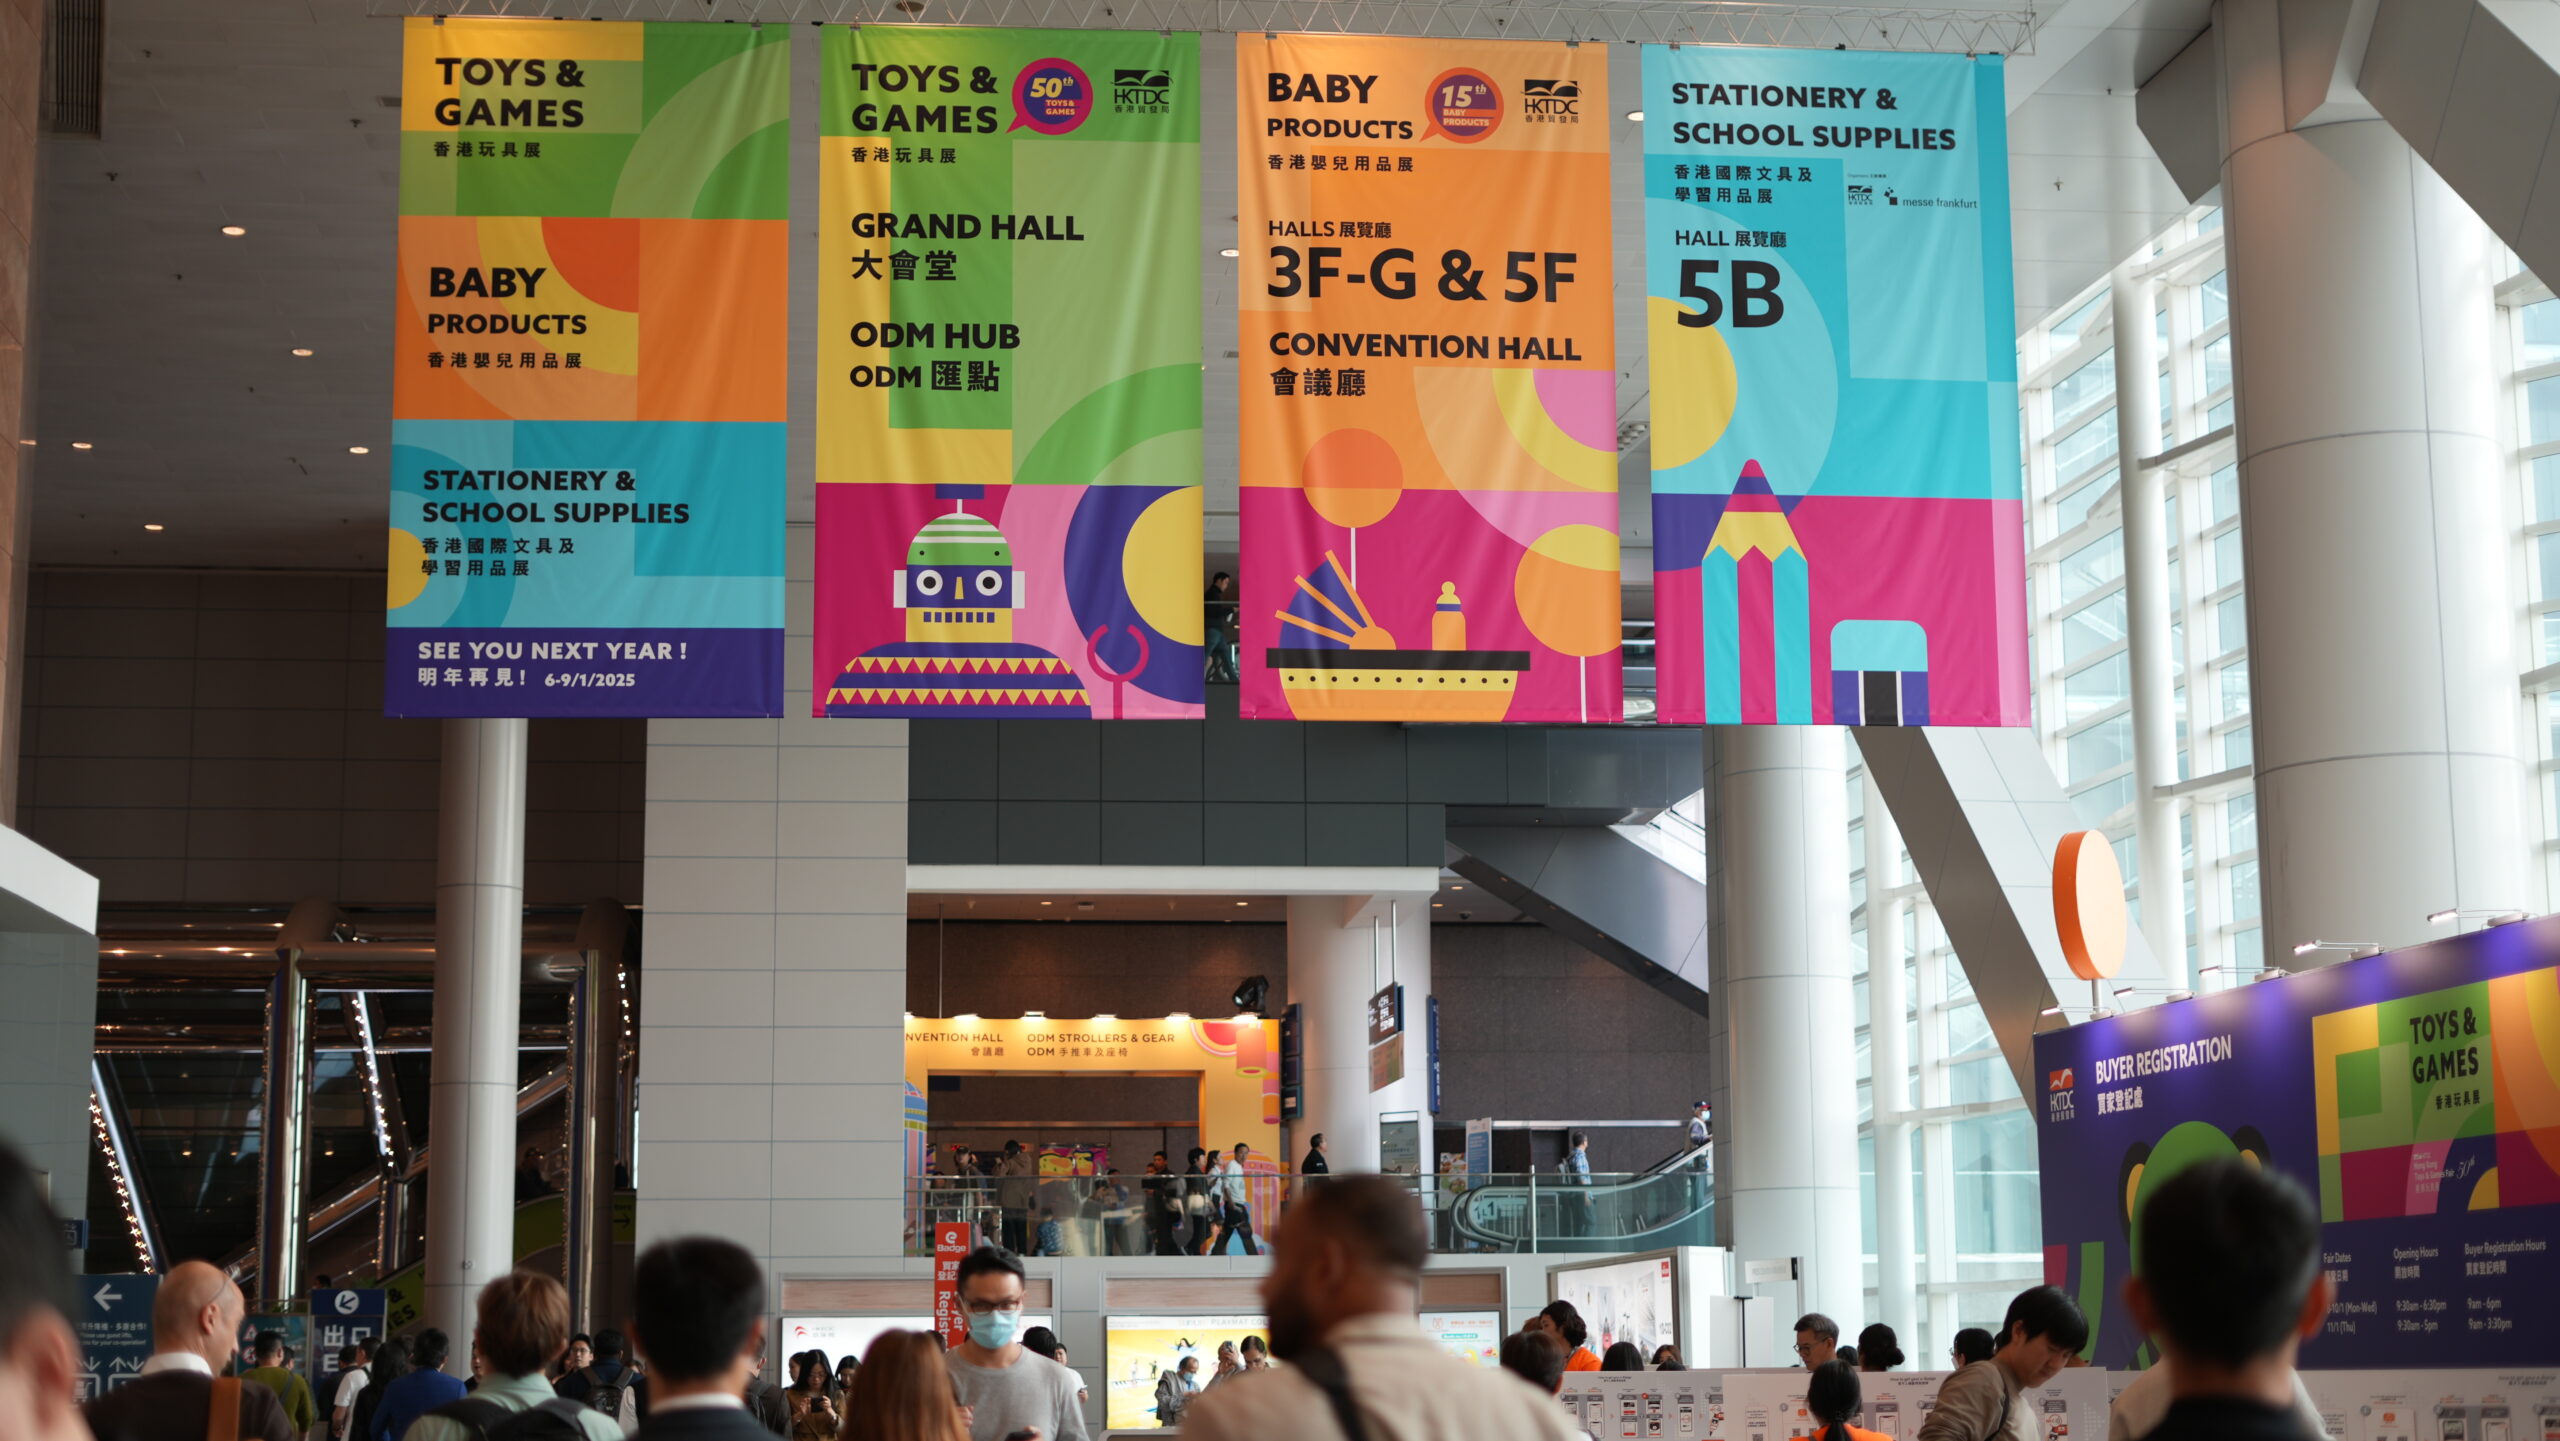 Colourful banners welcoming the crowds outside the exhibition halls!